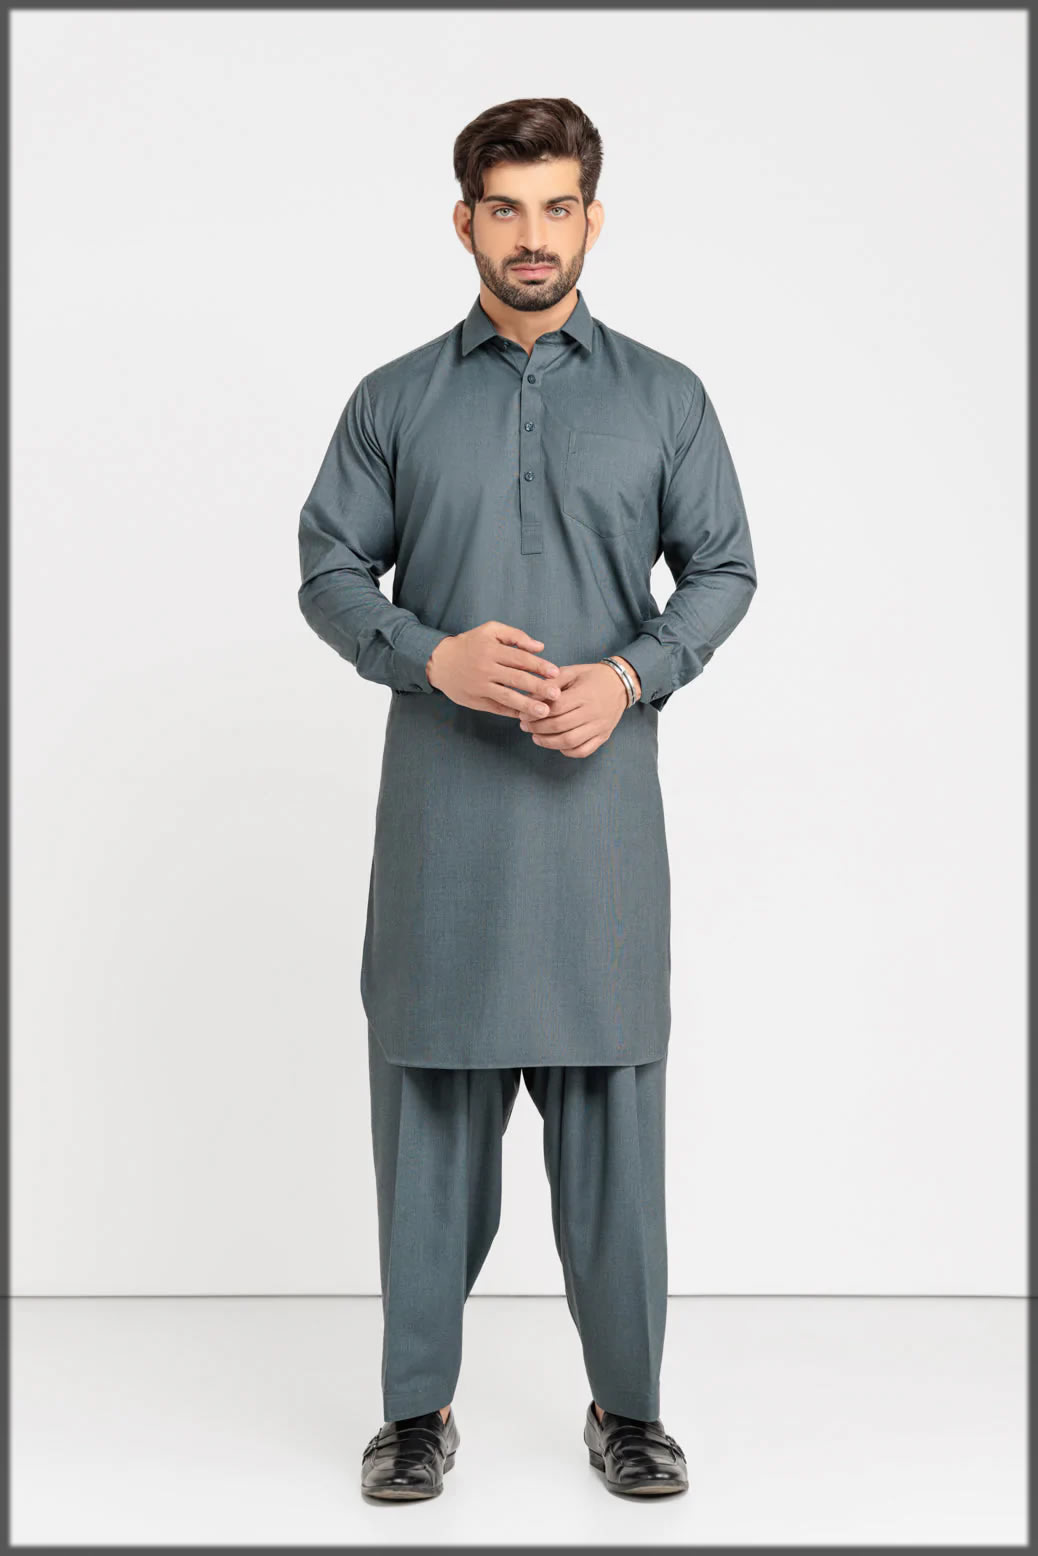 BLENDED-SHALWAR SUIT by Bonanza